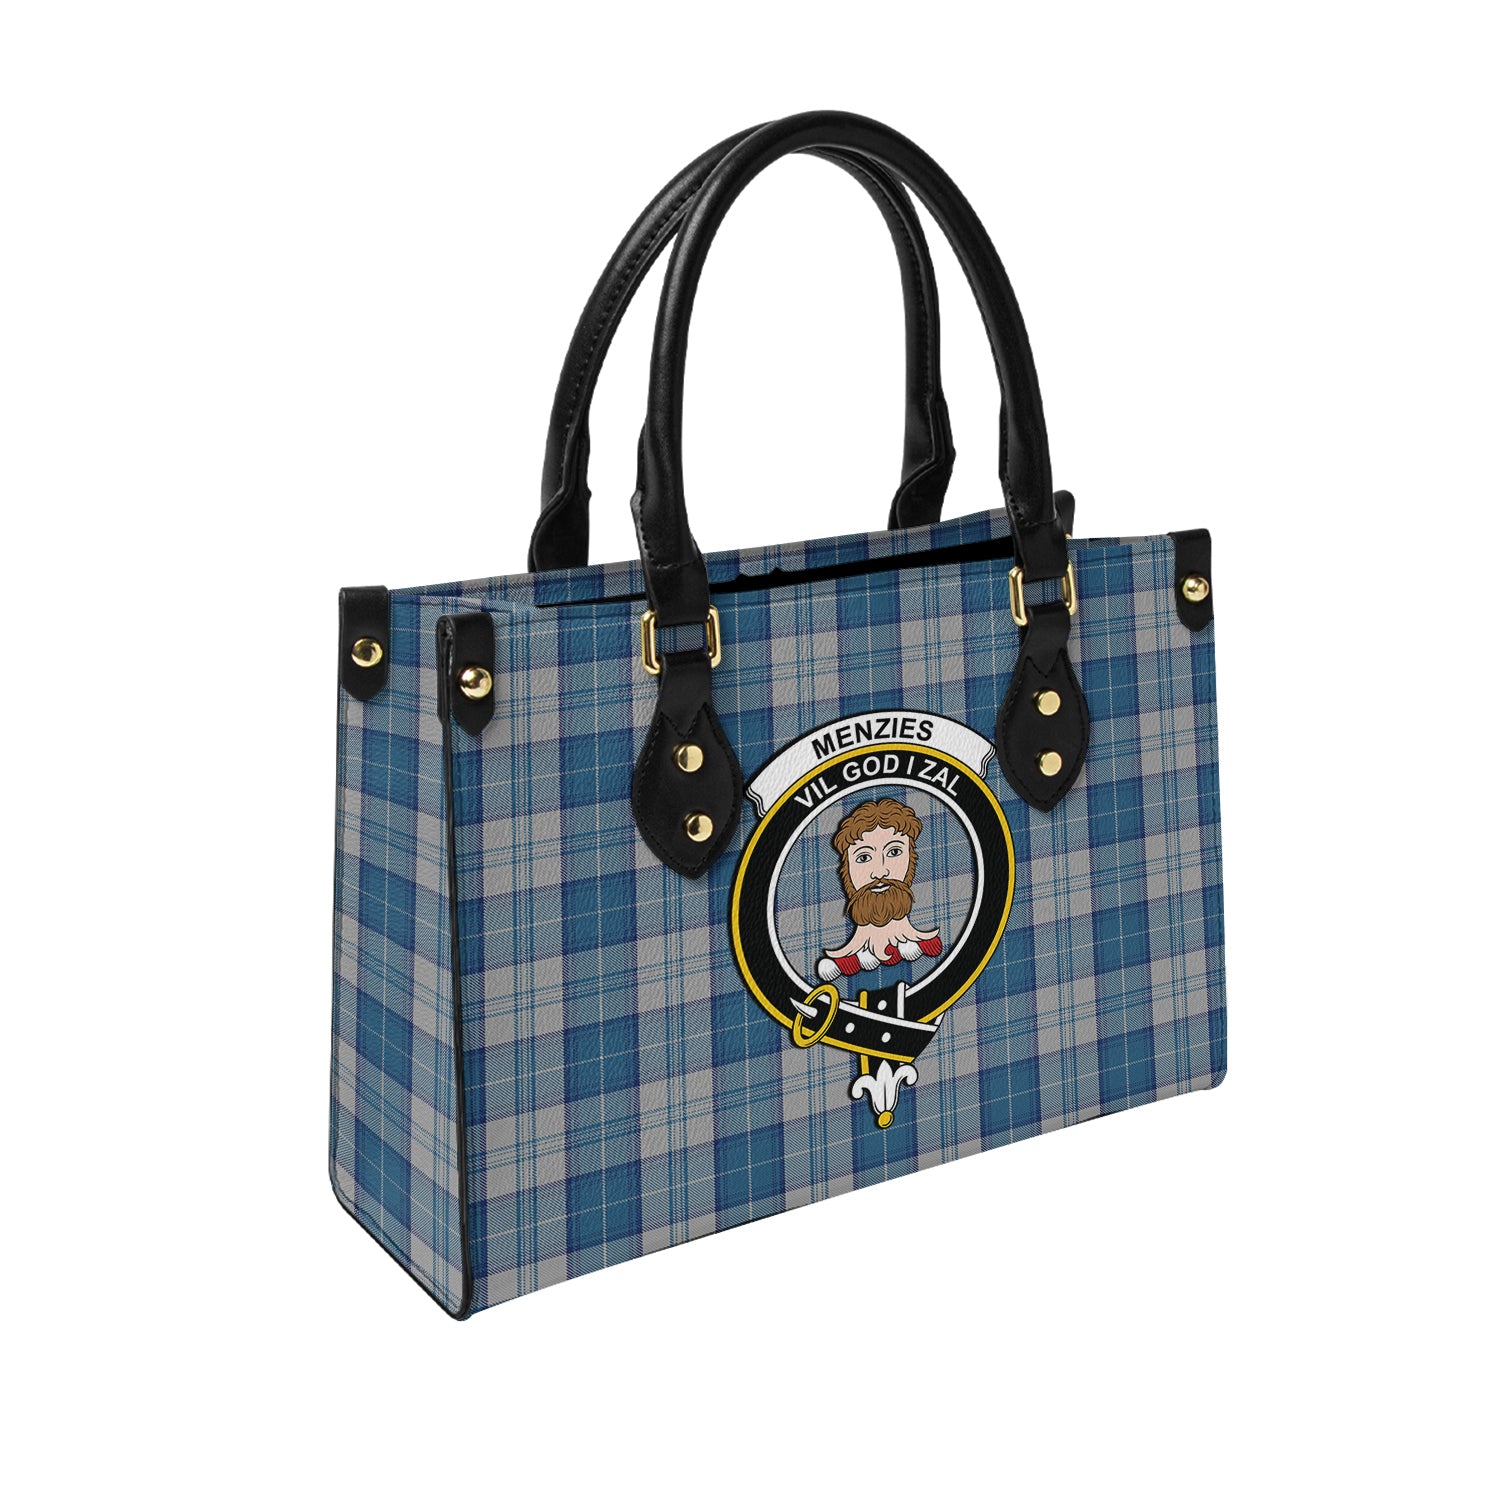 menzies-dress-blue-and-white-tartan-leather-bag-with-family-crest